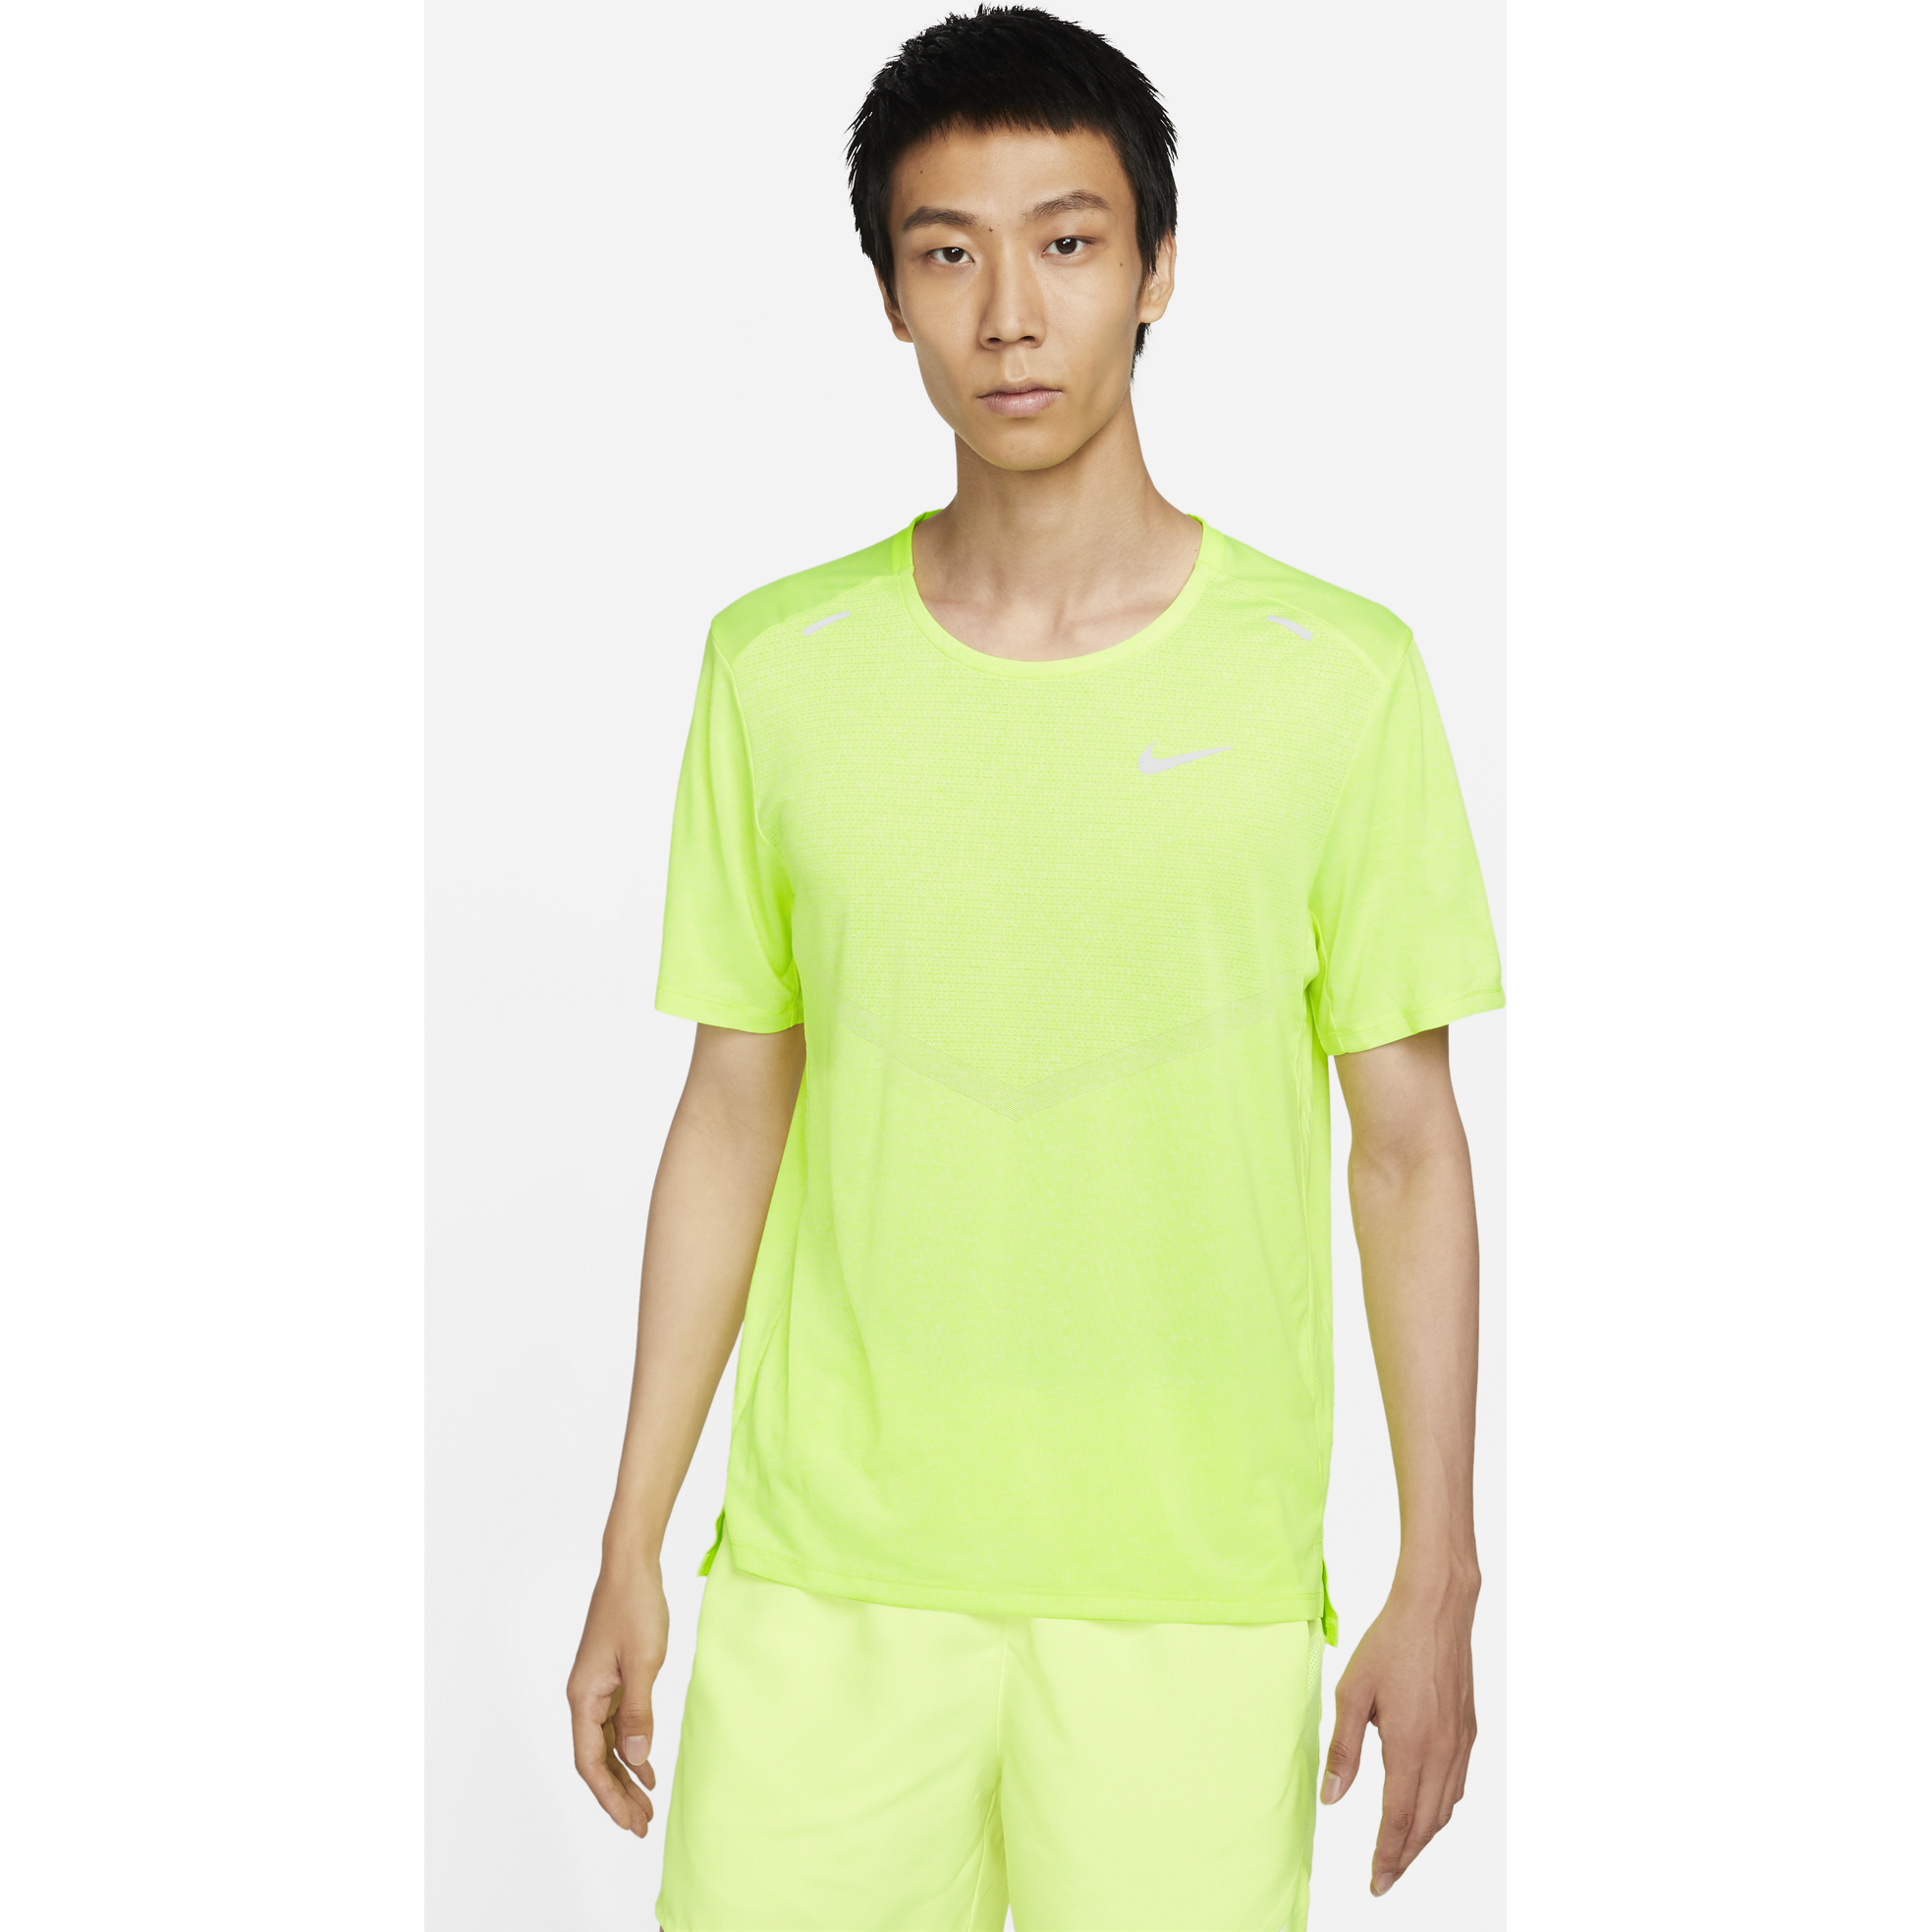 Nike-Men's Nike Dri-Fit Rise 365 Short Sleeve Top-Volt/Heather/Reflective Silver-Pacers Running